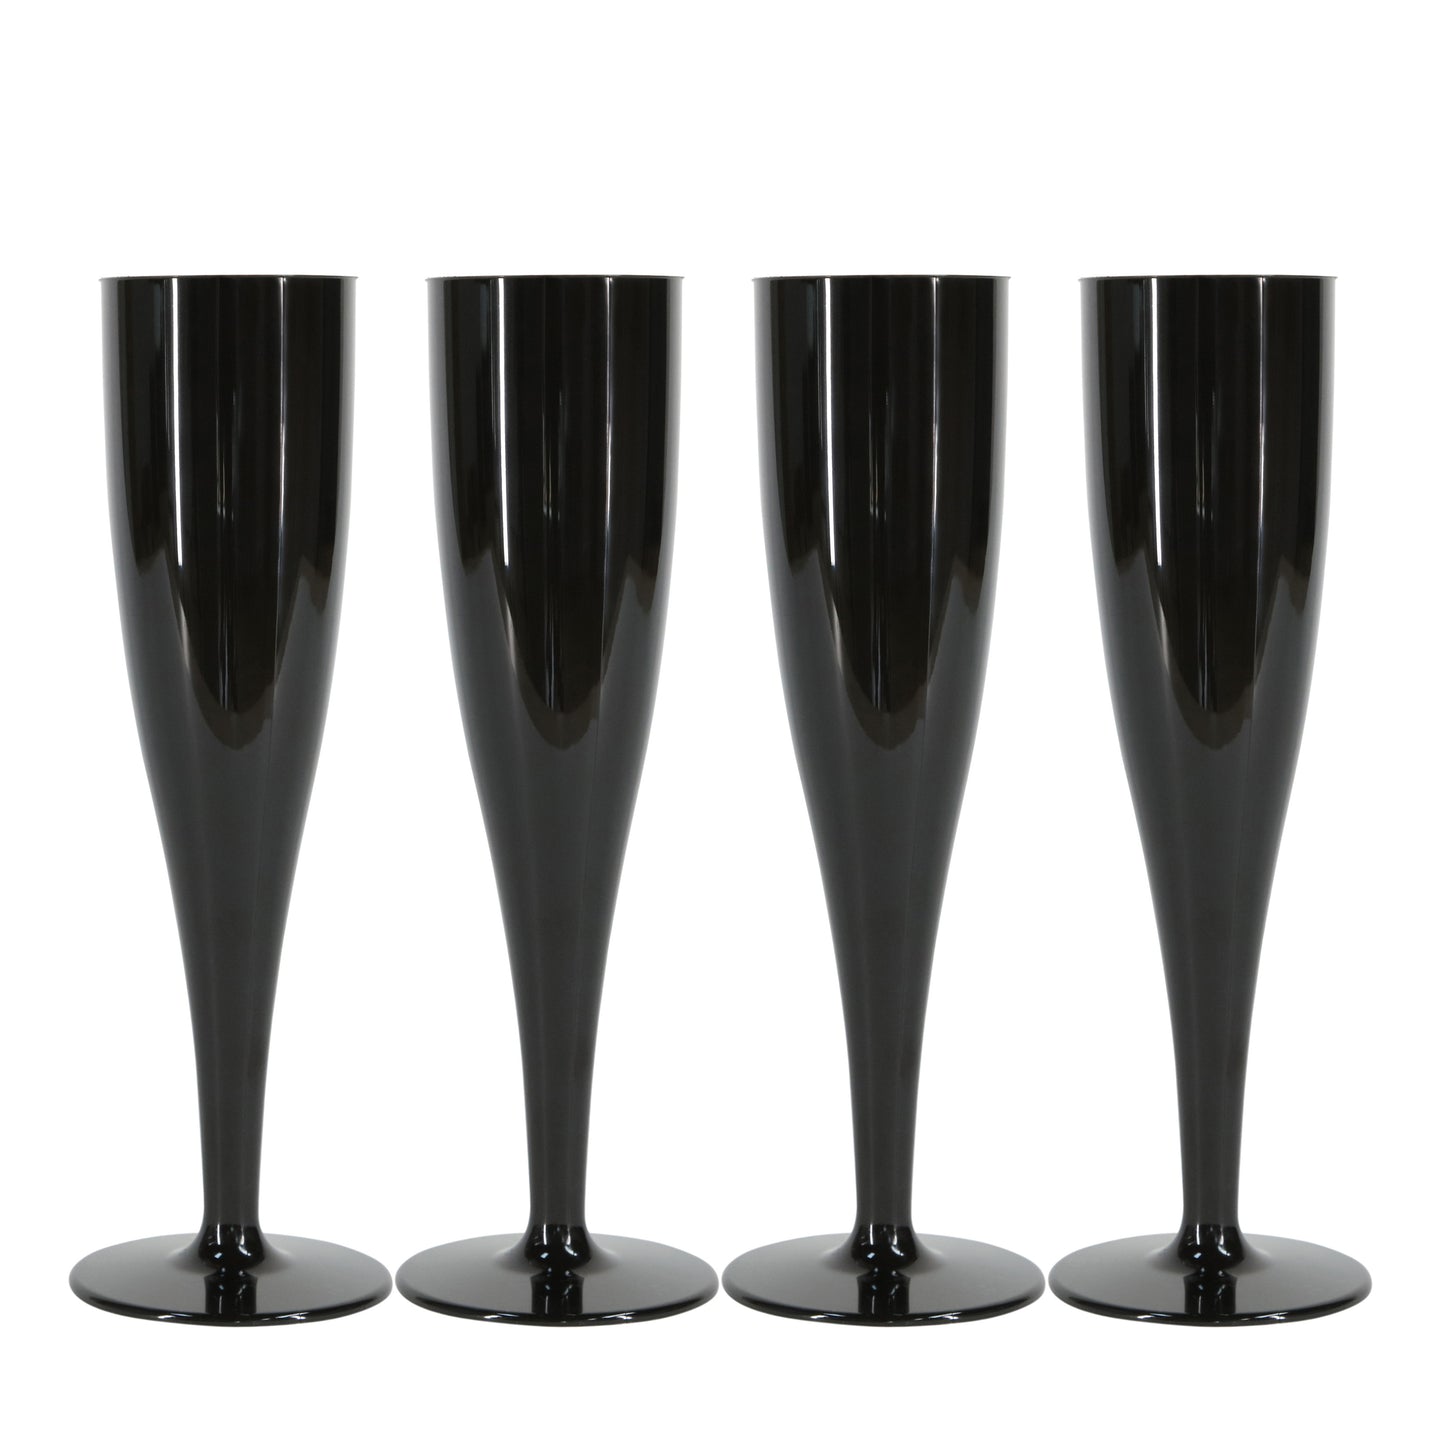 10 x Black Prosecco Flutes – Made from Biodegradable Material in glossy Bold Black Colour 1-Piece Champagne Glass (Pack of 10 Glasses) for use Indoors and Outdoors, Halloween, Parties, BBQ, Hen Do-5056020186779-PCUP-CHAMPBIOBLACK-Product Pro-Black Flutes, Champagne Flute, Champagne Glasses, Flutes, Prosecco Flute, Prosecco Glasses